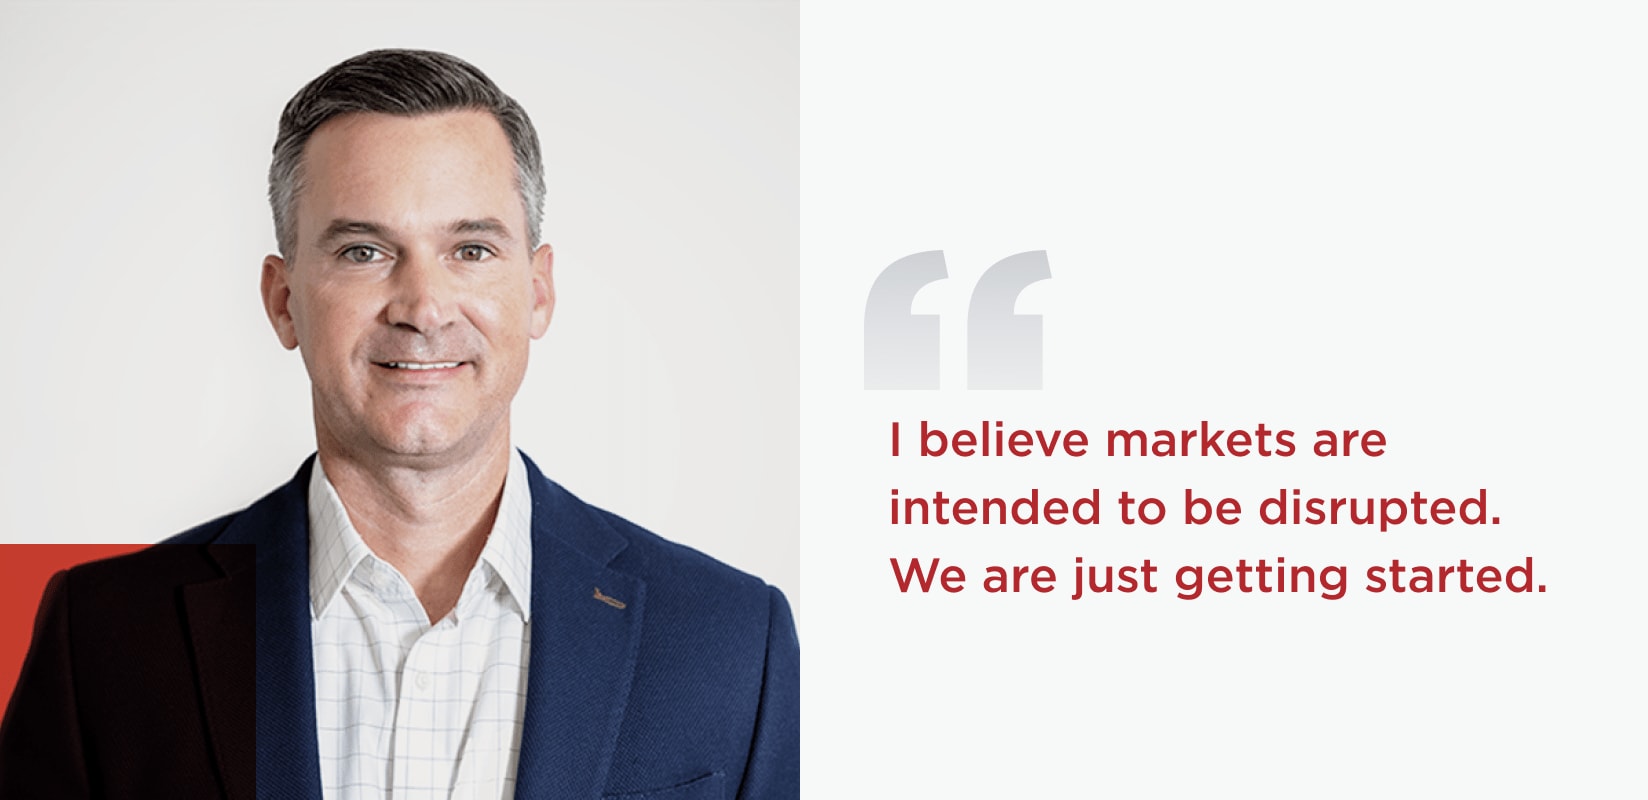 Decorative headshot of Ping Identity Chief Revenue Officer, Jason Wolf, with the following quote 'I believe markets are intended to be disruptive. We are just getting started.'